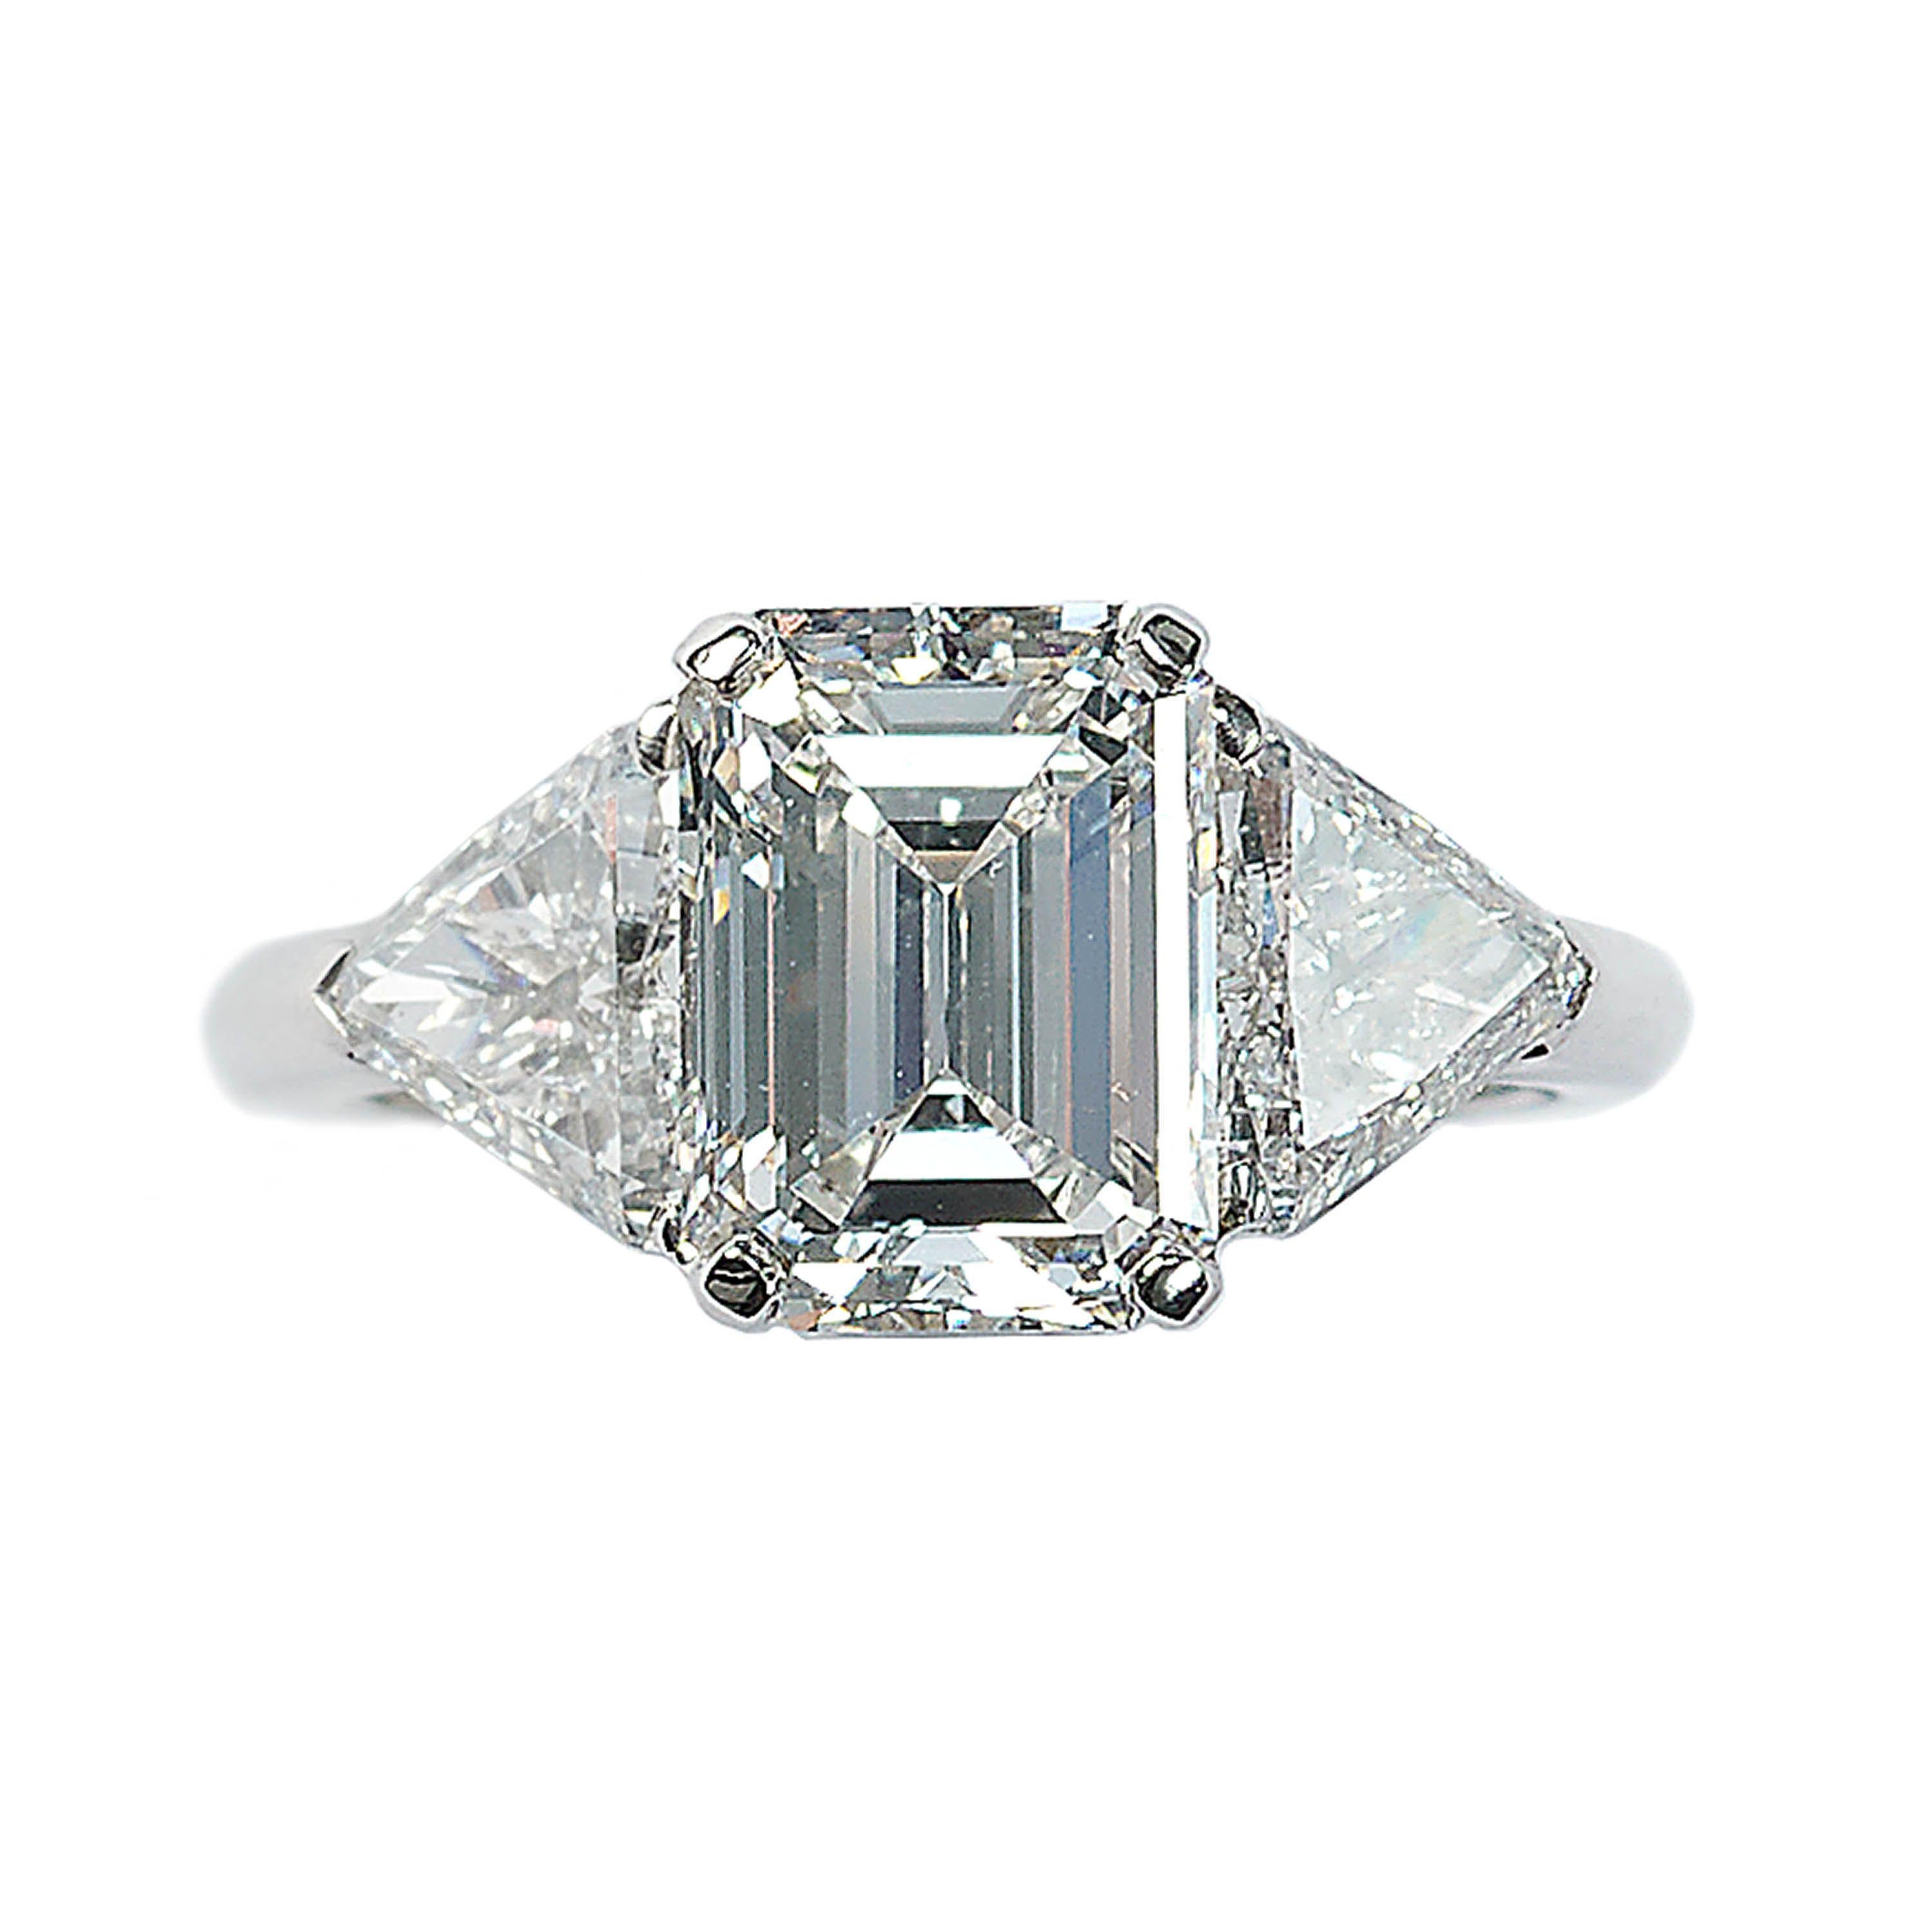 A modern three stone diamond ring, with a central 3.15 carat, E colour, VVS2 clarity emerald-cut diamond, accompanied by GIA certificate number 1226332657, in a four claw setting, with a trilliant-cut diamond, in a three claw setting, in each